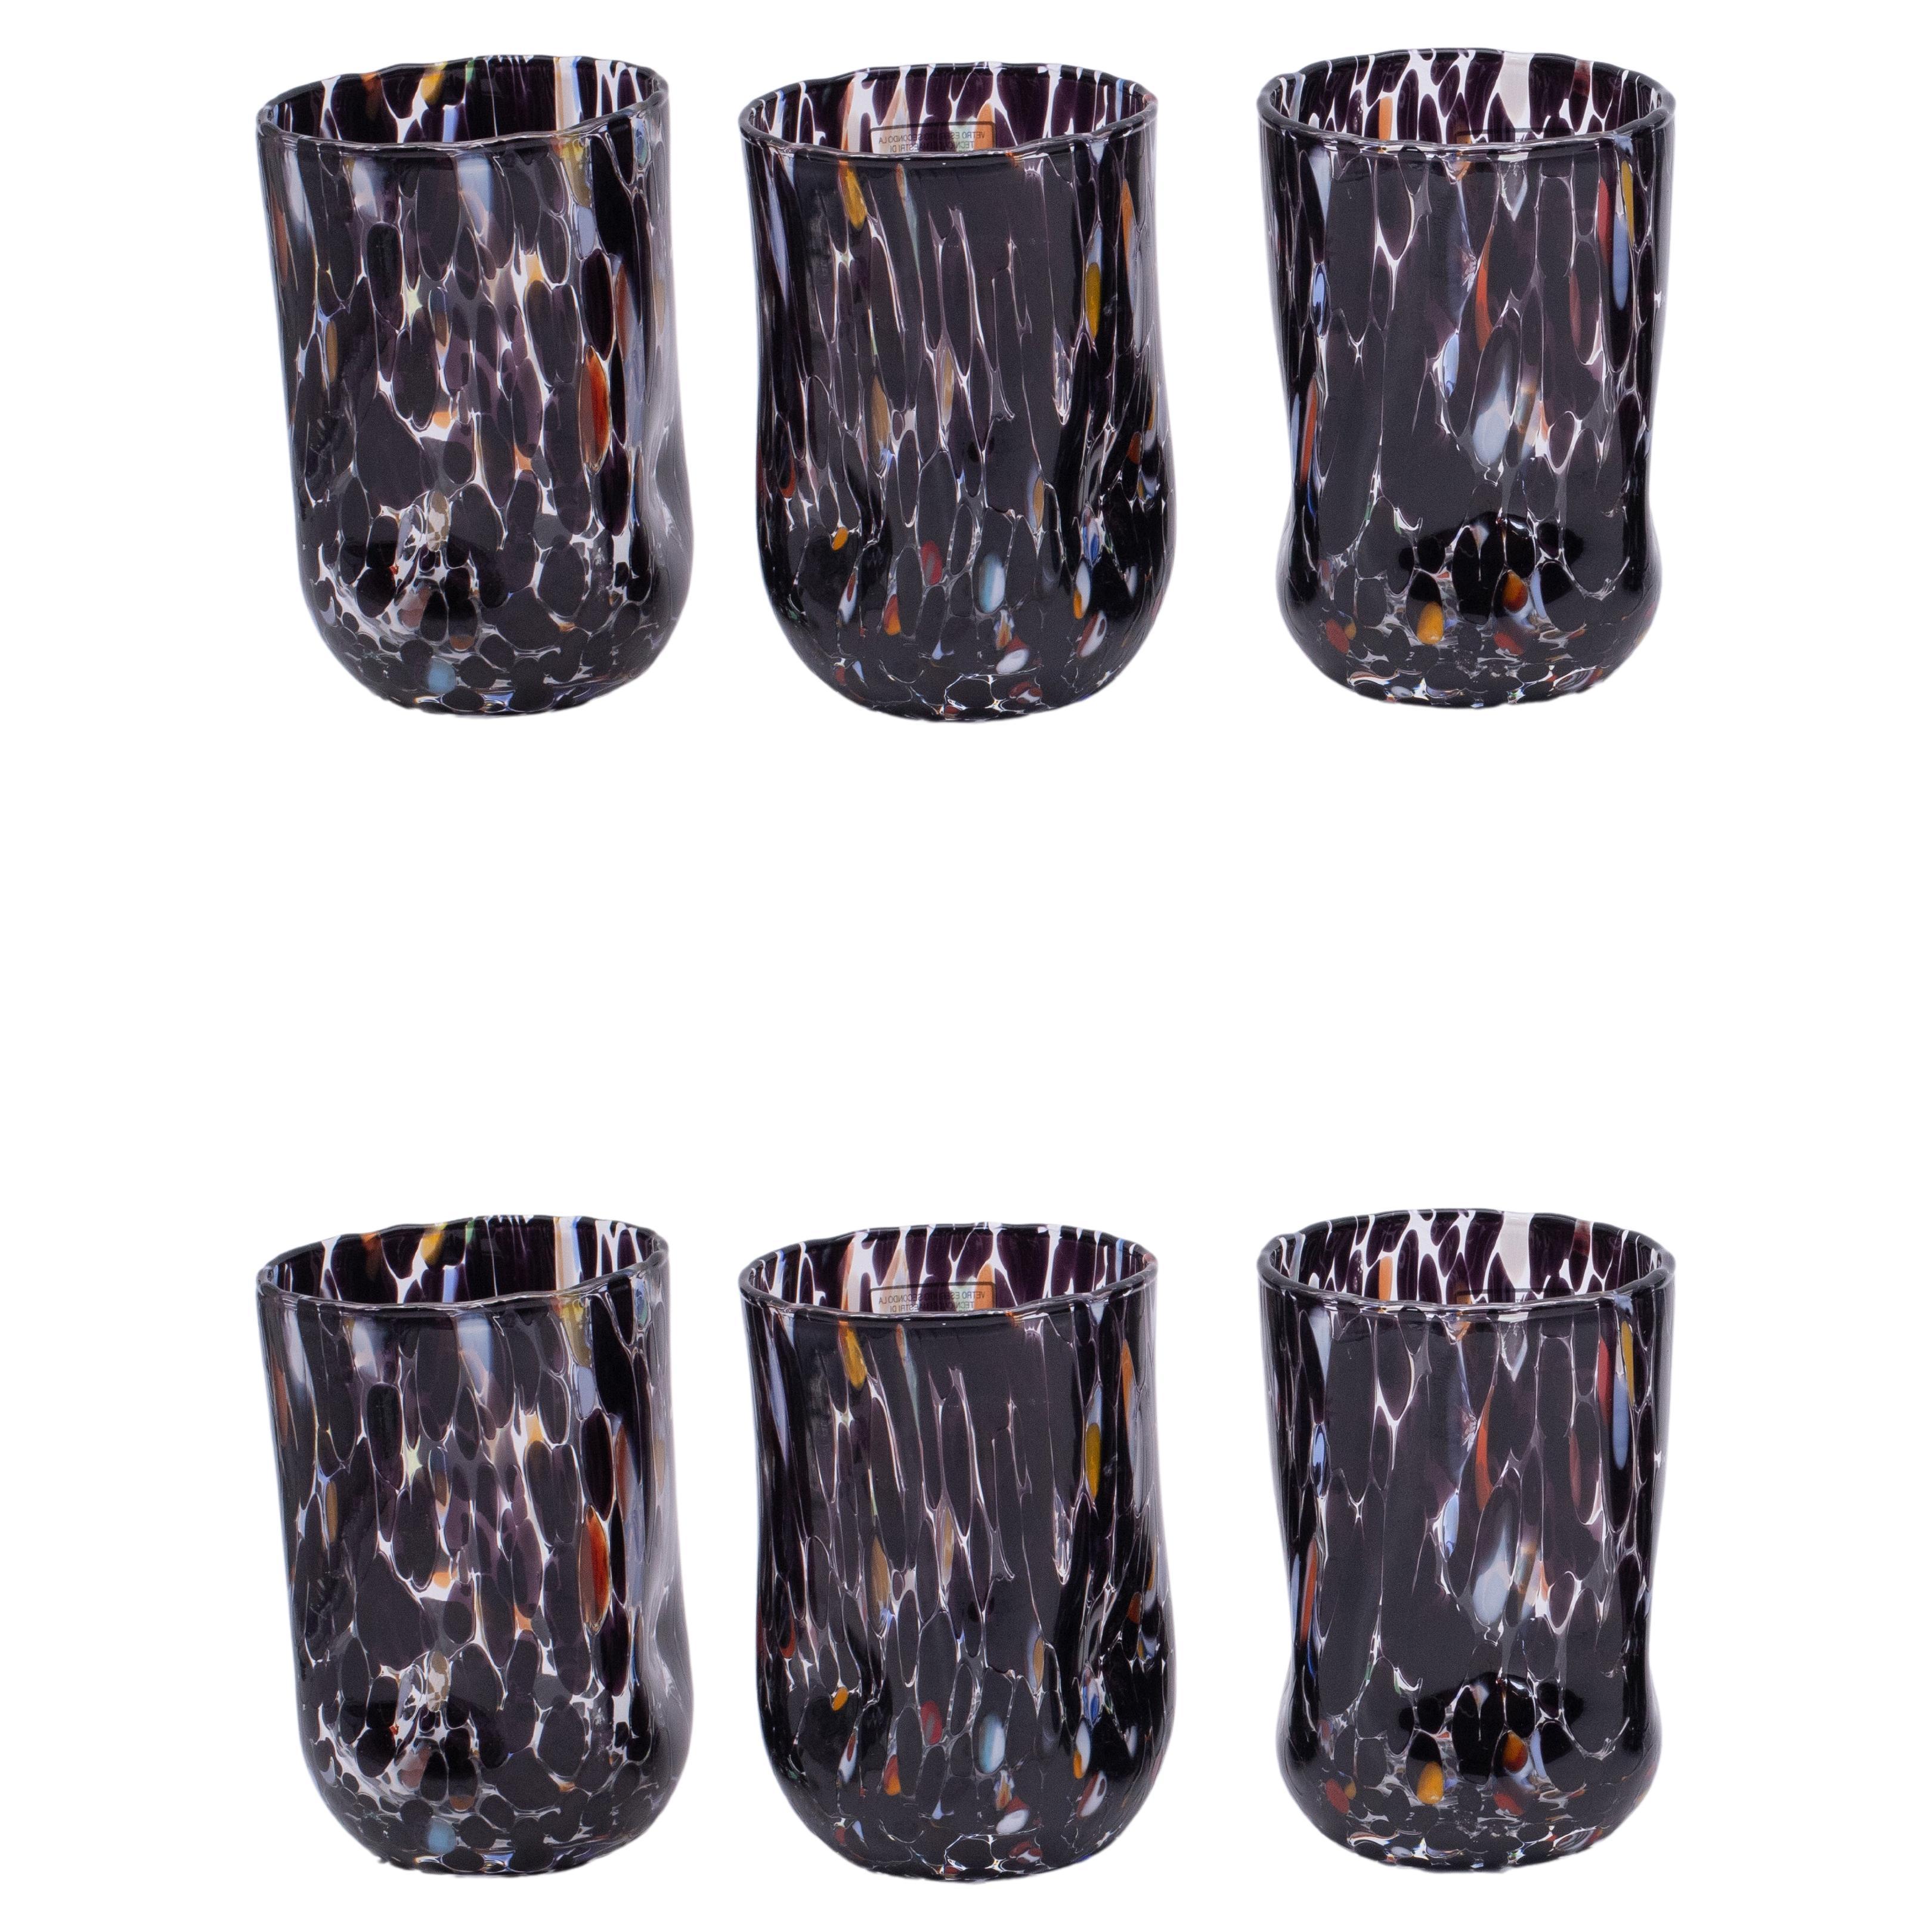 Set of 6 Murano glasses color "Black" handmade, Murano glass Made in Italy For Sale